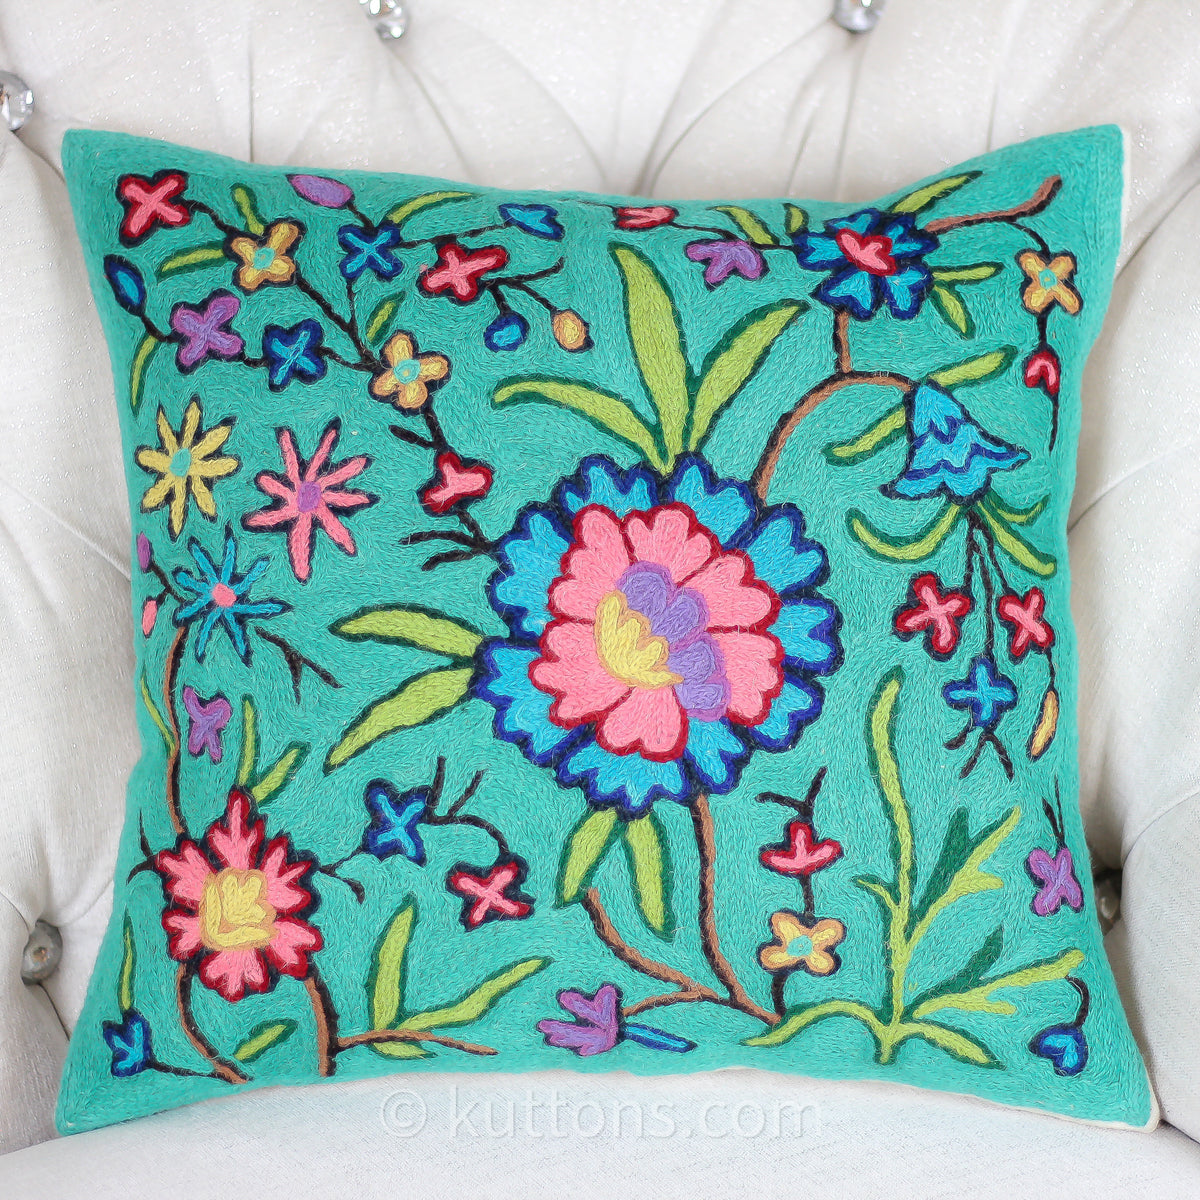 Kashmiri Ari Embroidery Handcrafted Cushion Cover - Cotton & Wool